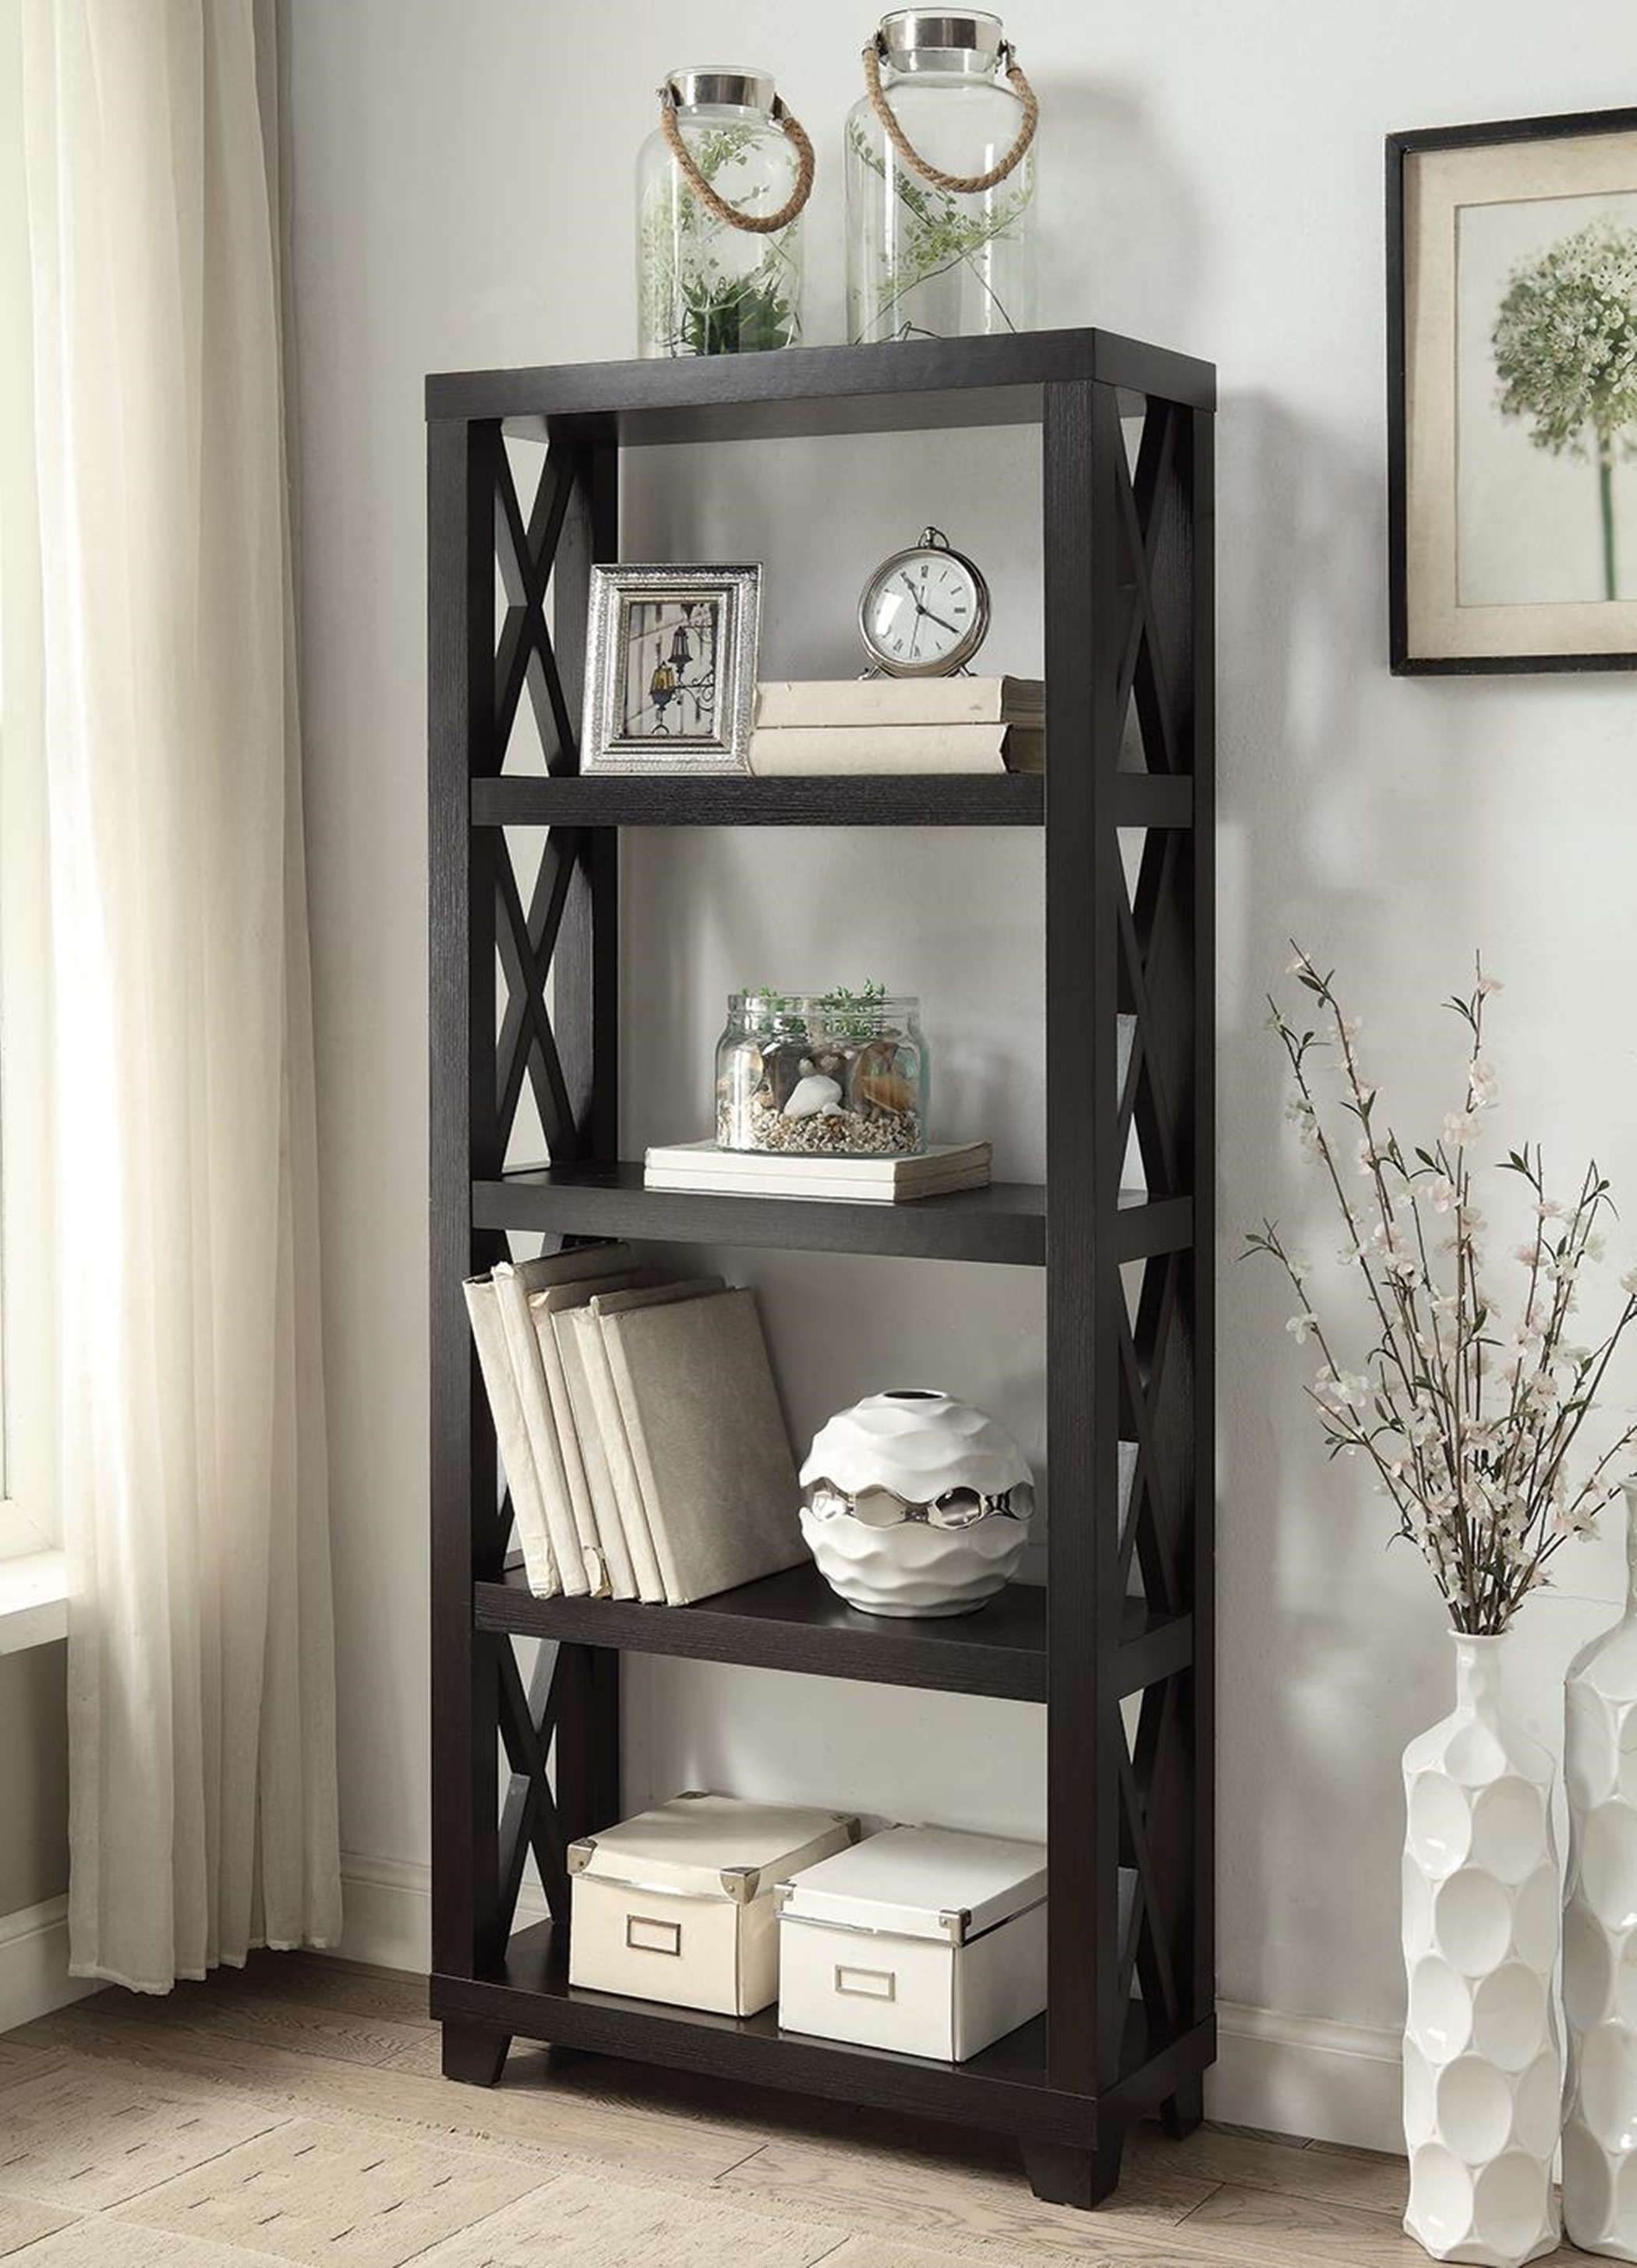 Humfrye Capp. Bookcase